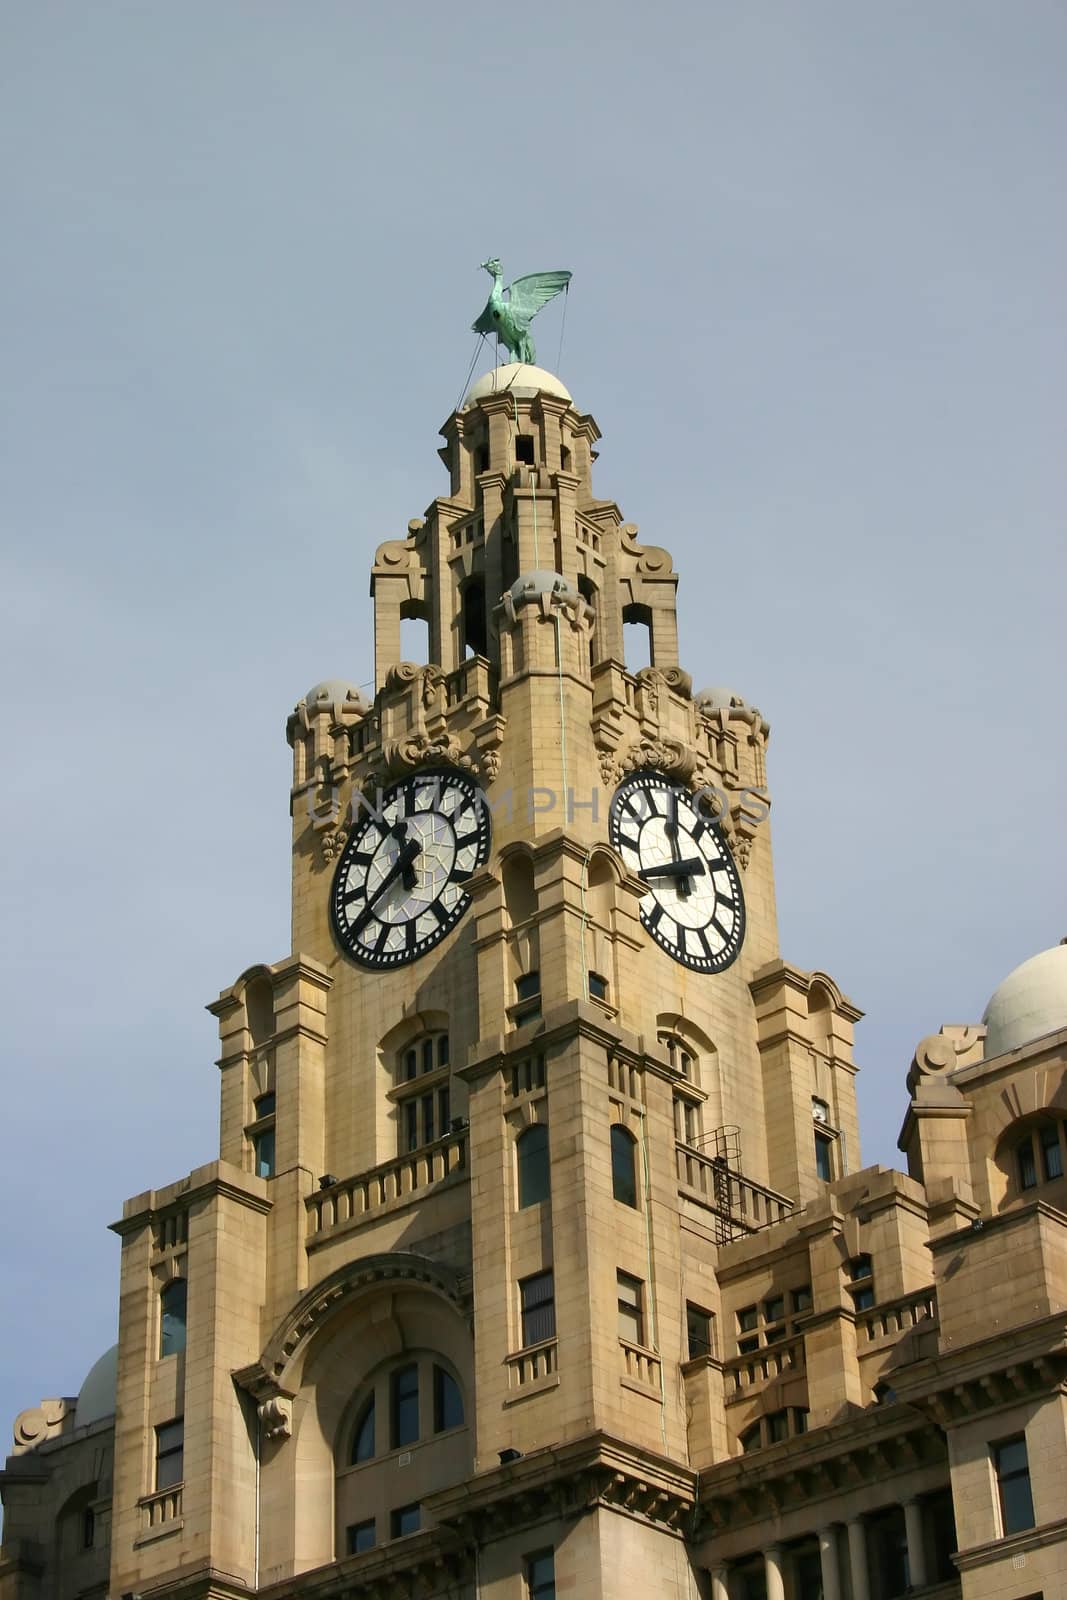 Historic Liver Buildings in Liverpool